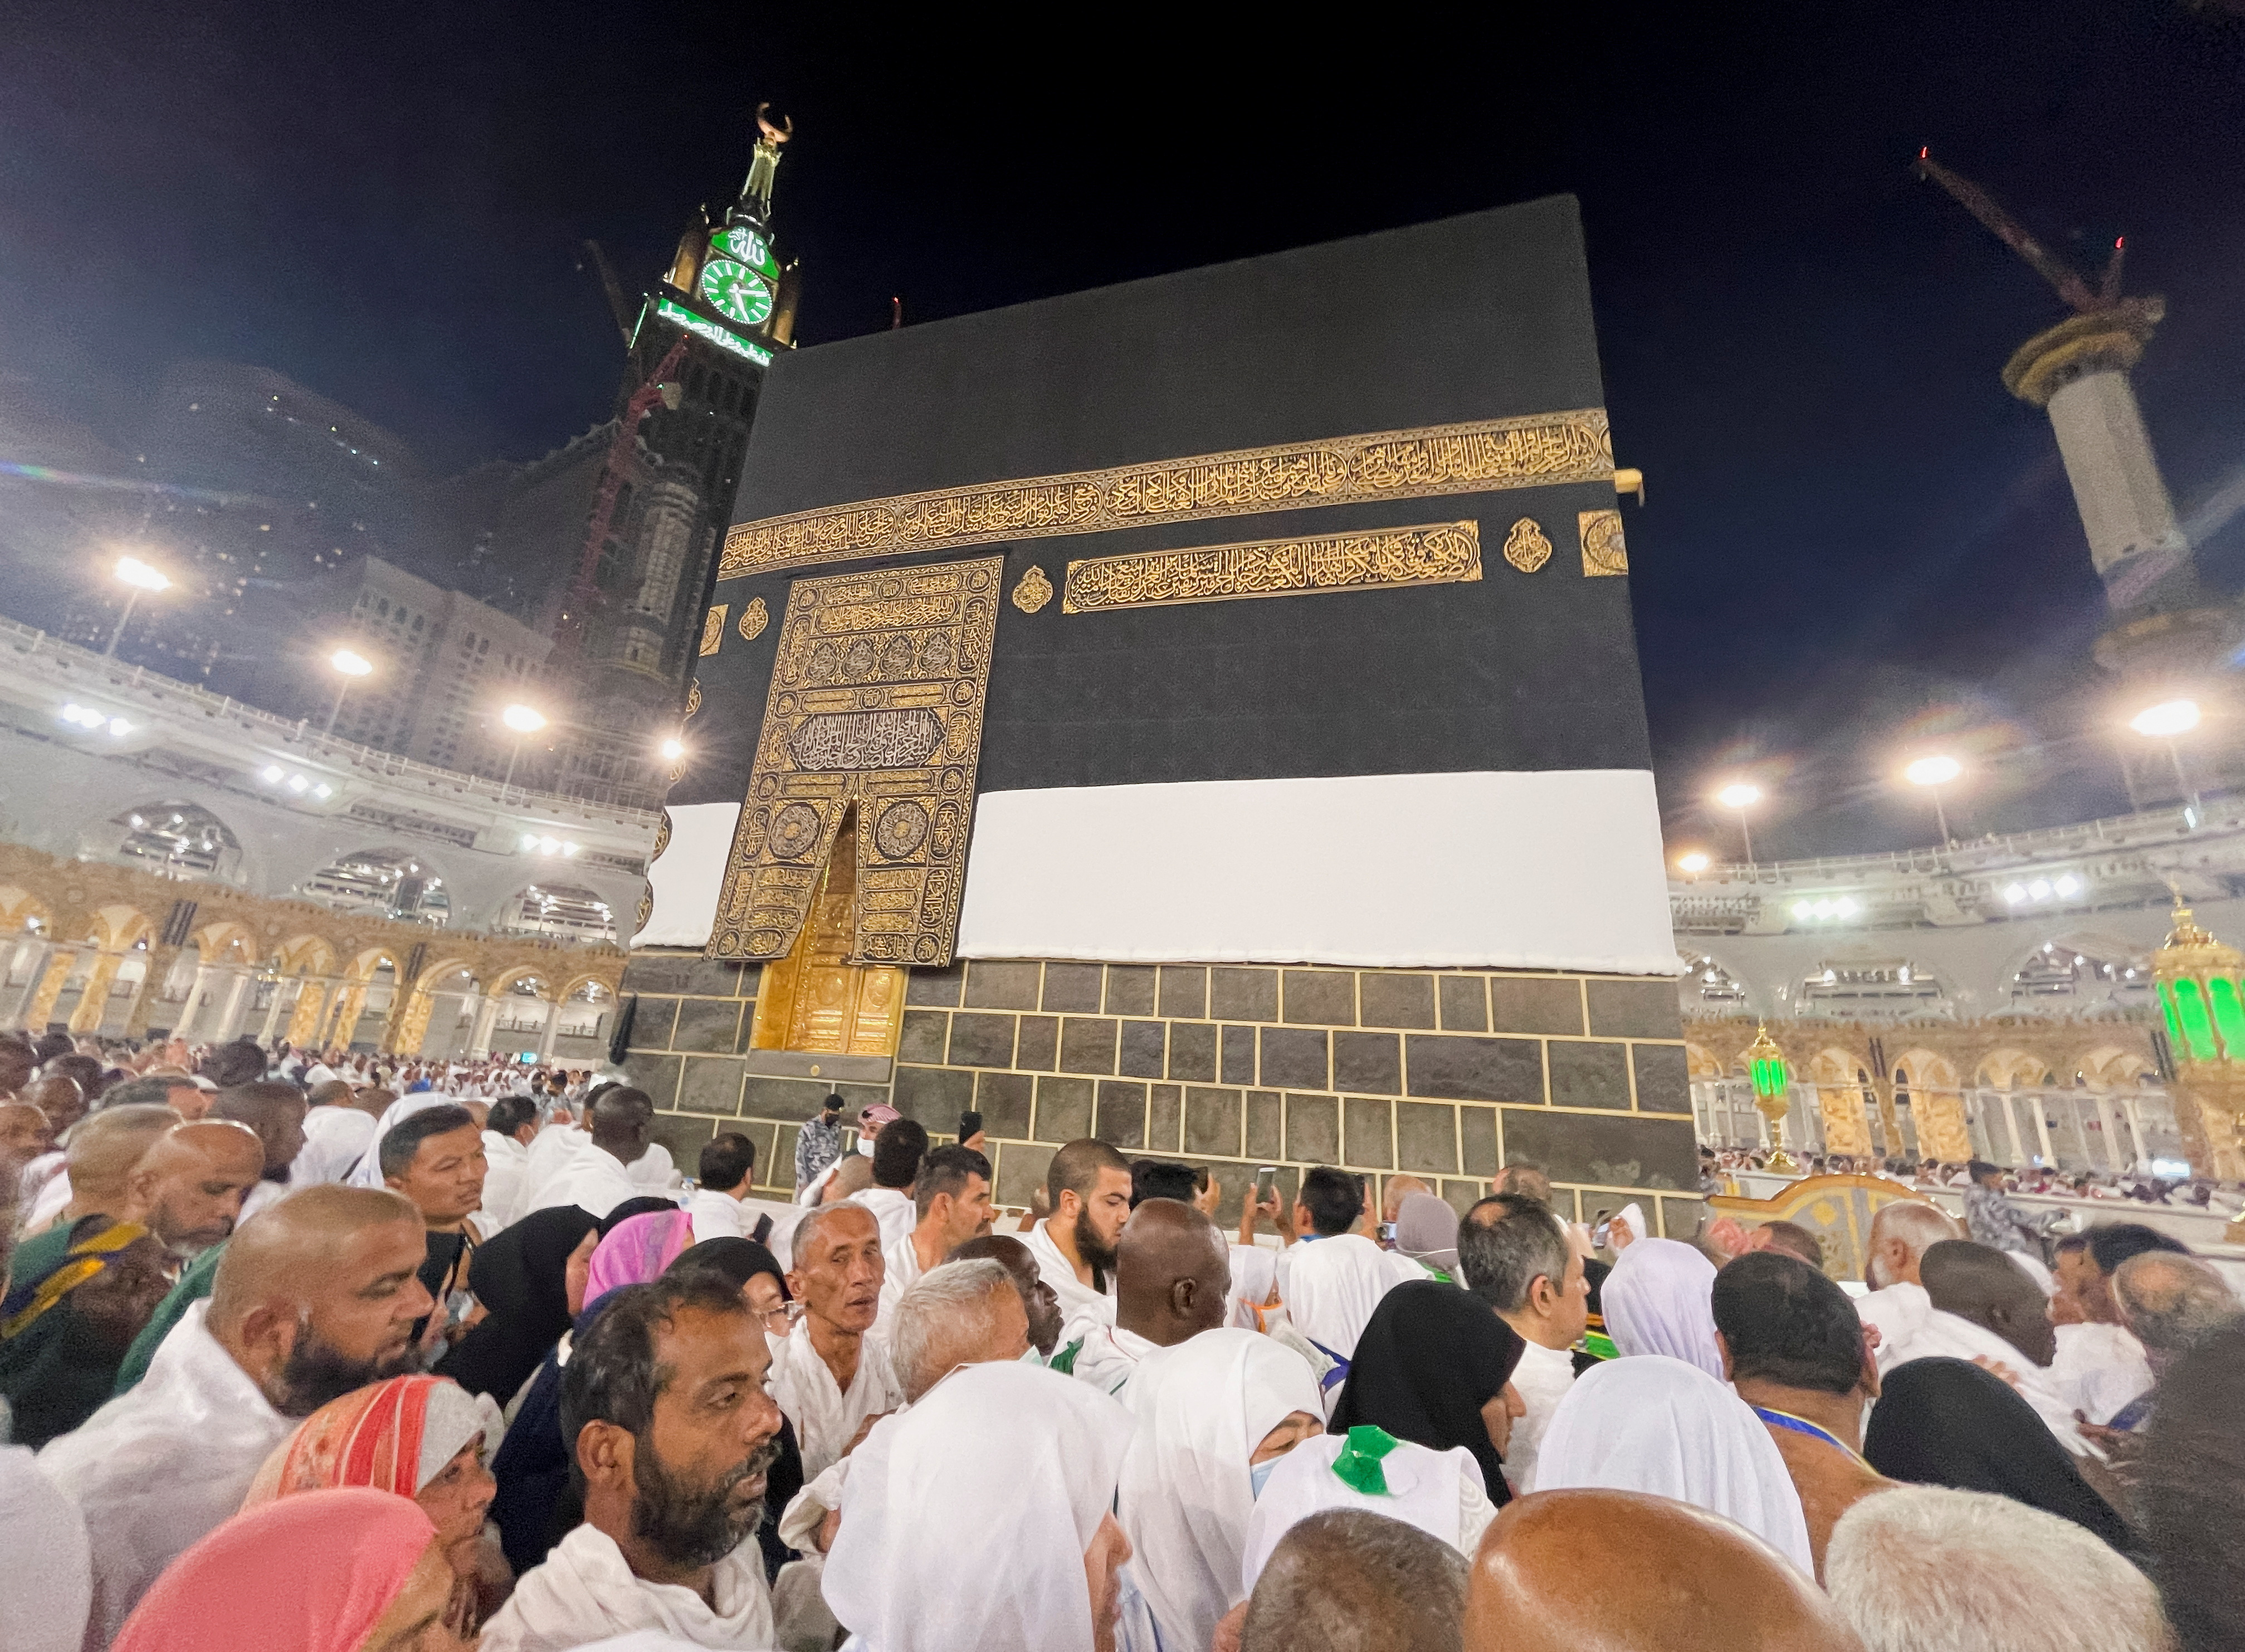 Muslim pilgrims circle the Kaaba and pray at the Grand mosque in the holy city of Mecca, Saudi Arabia